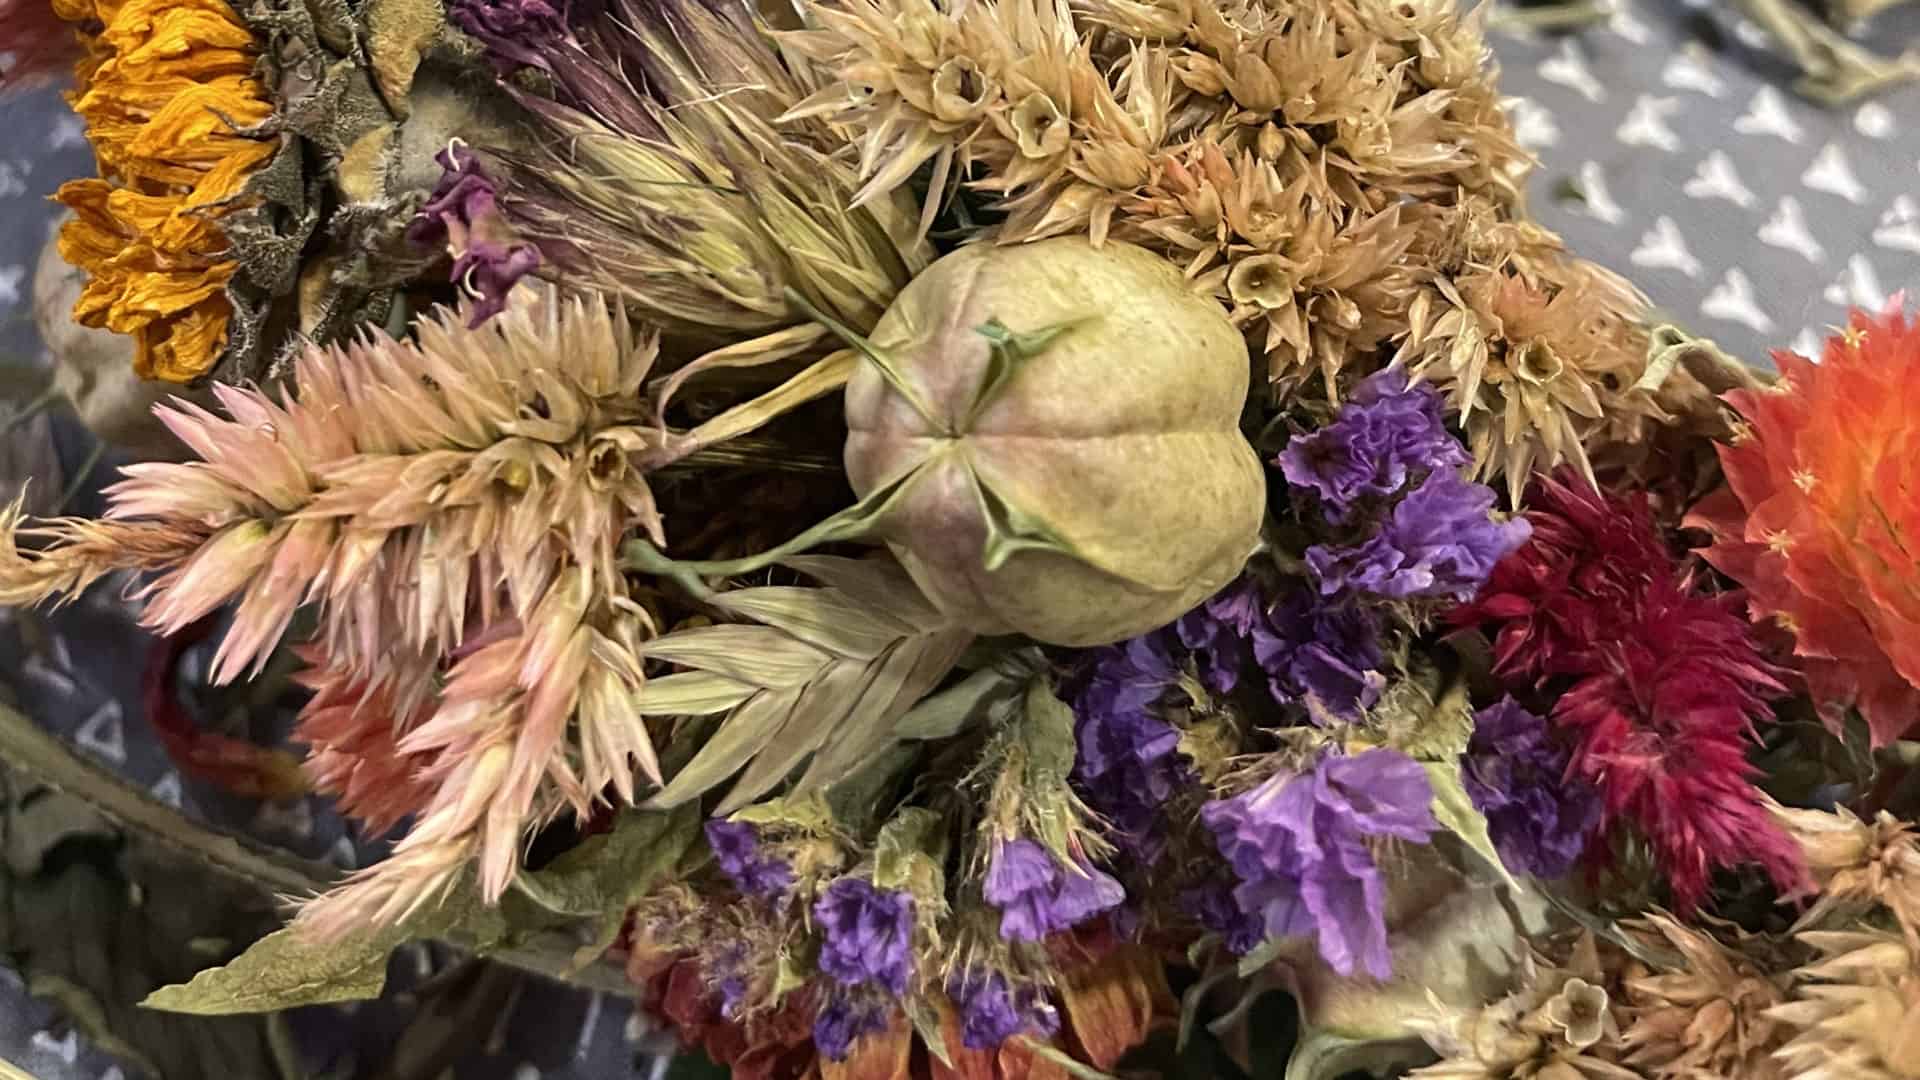 Dried flowers show vivid color in a workshop on making flower crowns with Full Well Farm at the Plant Connector in North Adams.